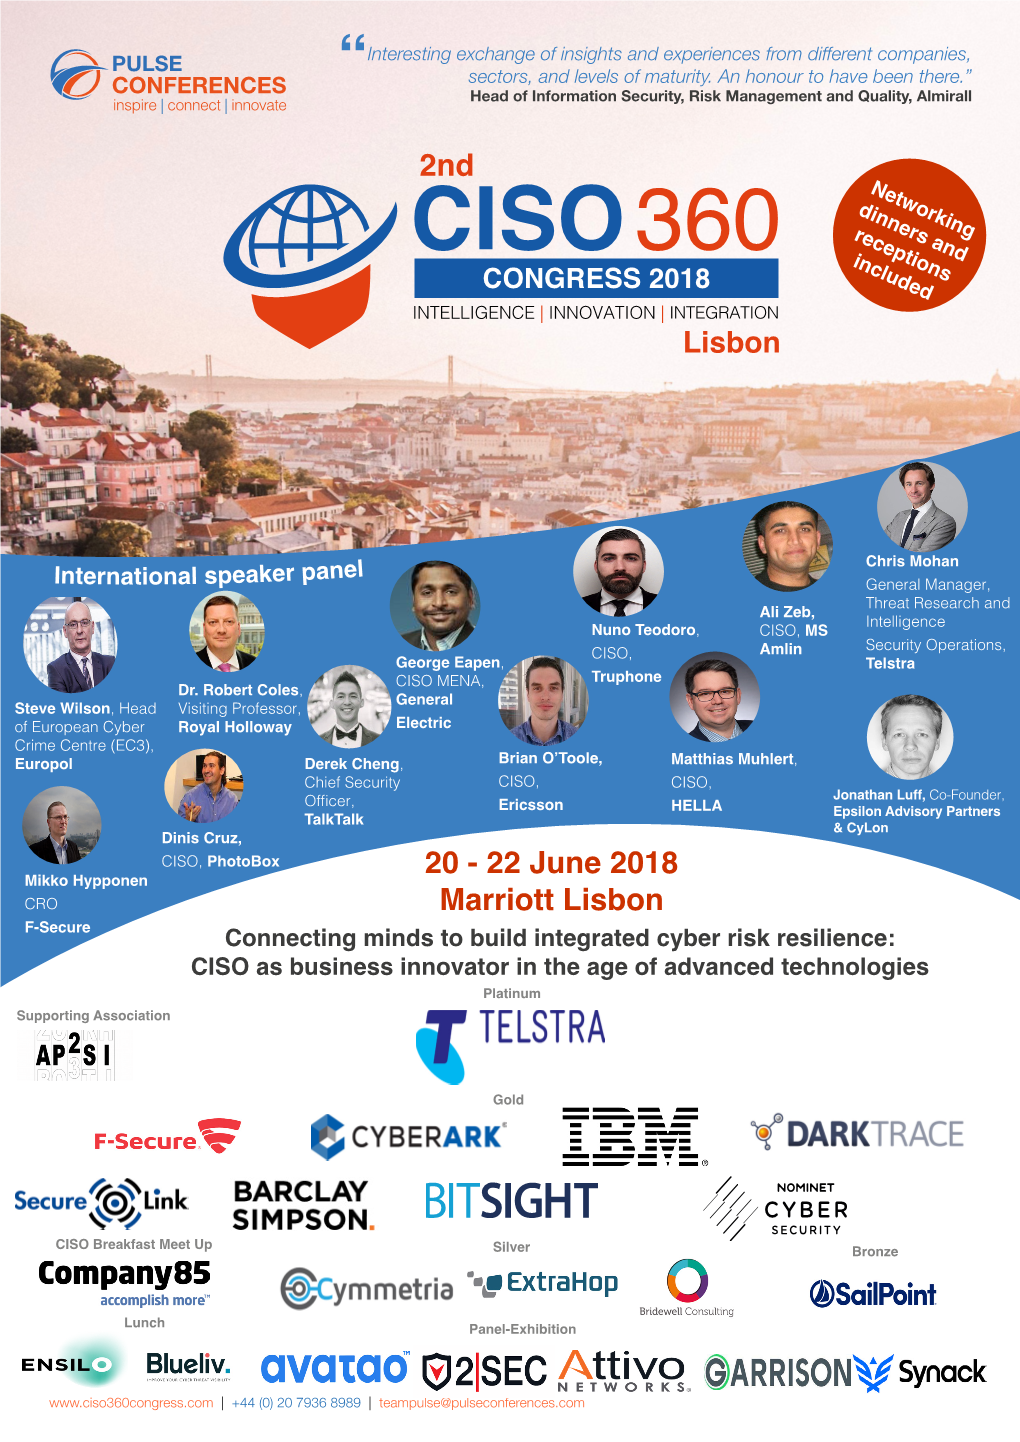 Download the 2Nd CISO 360 Brochure, Lisbon 2018